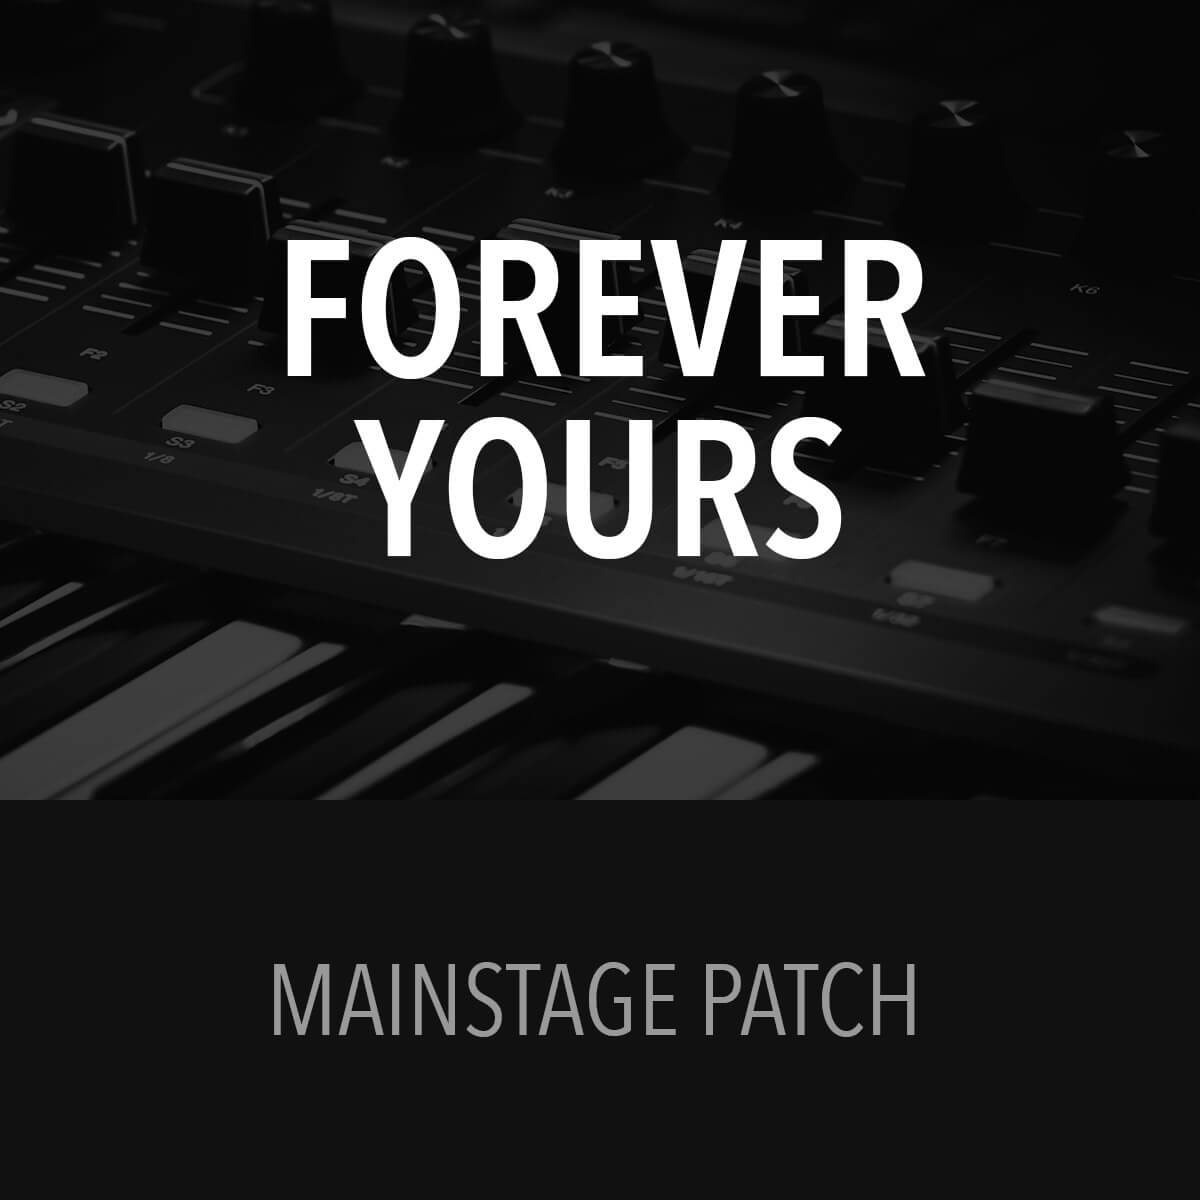 MainStage Patch - Forever Yours - Fellowship Creative